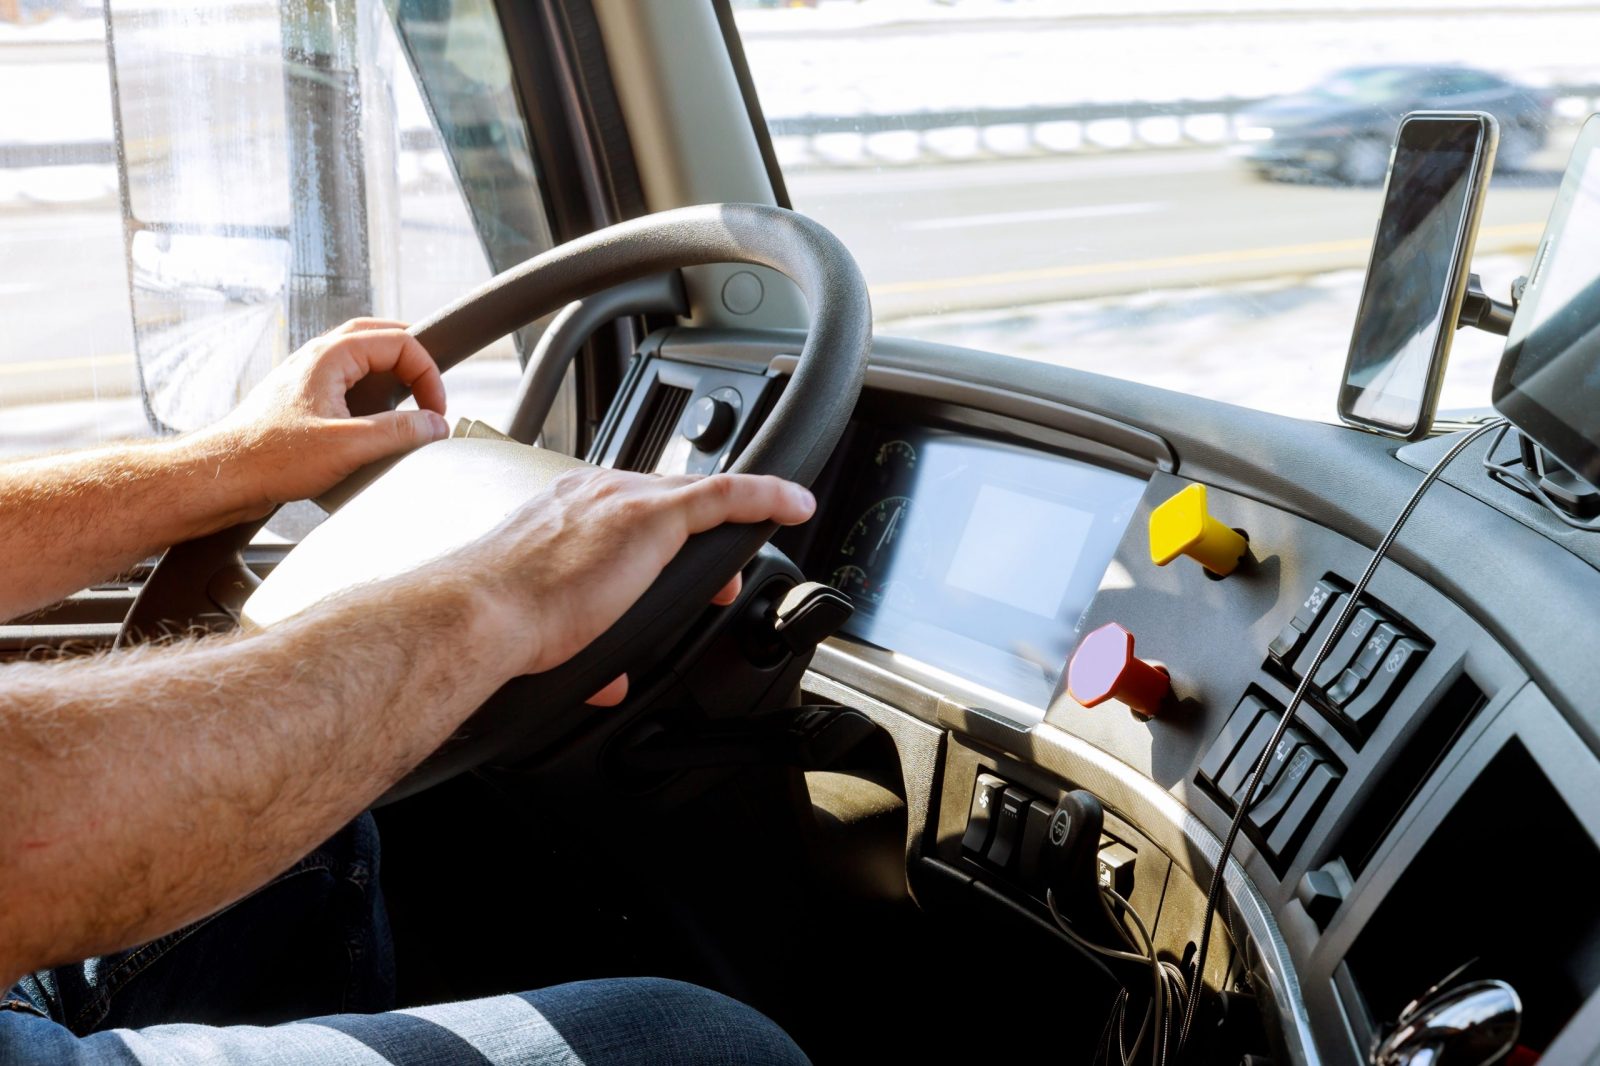 You Can Receive Out-of-State CDL Training with Home State CDL Permit - CDL school news